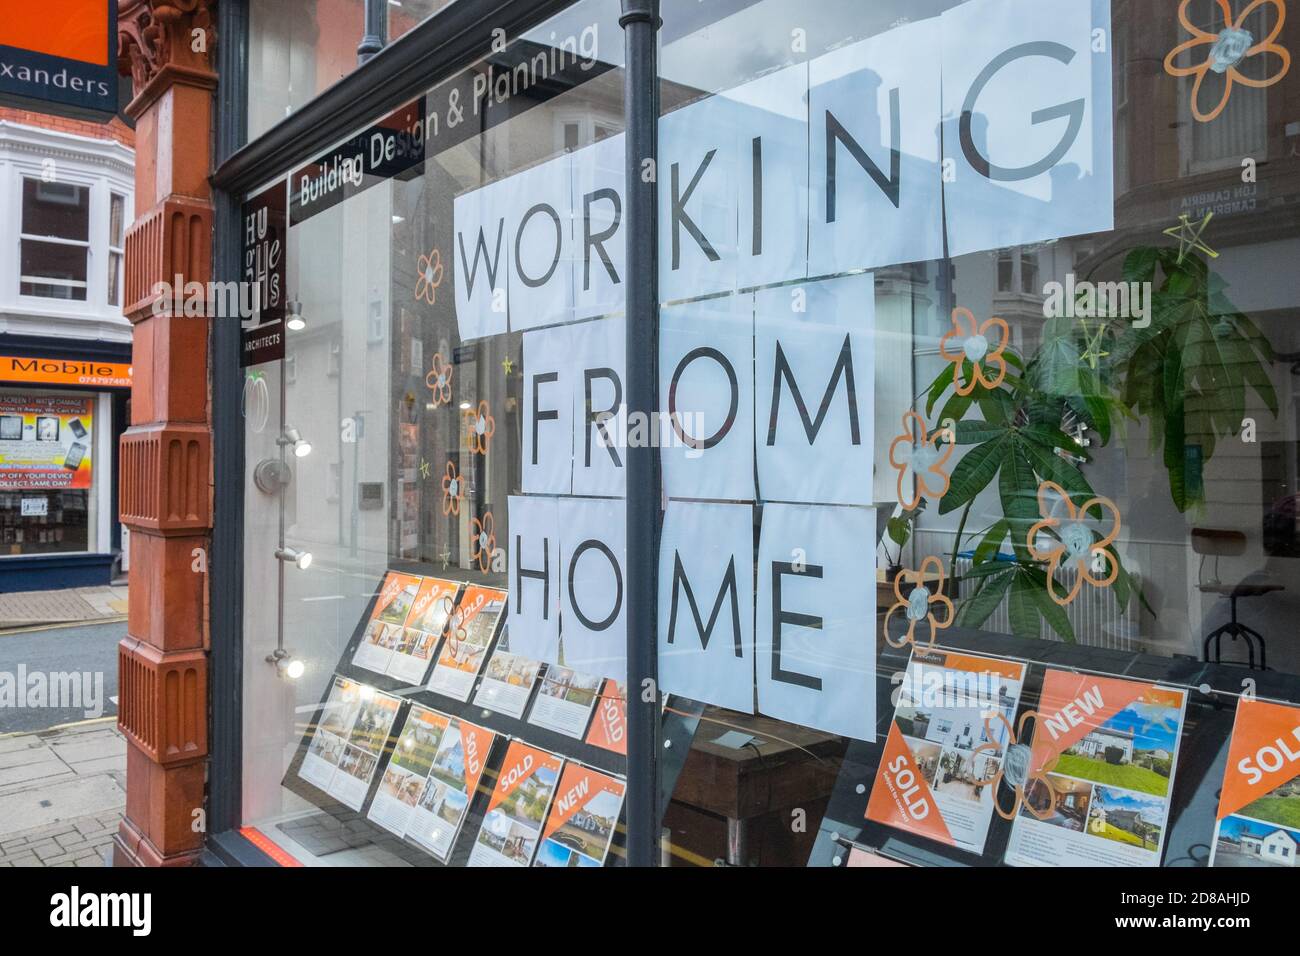 Working from Home,due,to,Covid 19,restrictions,during,17 day, firebreak,circuit break,sign,signage,in,shop window,of,Alexanders,High Street,real estate,estate agent,estate agency,shop,business,in,Aberystwyth,Aberystwyth Town,town,town centre, town centre,Cardigan Bay,coast,coastal,student,student town,Wales,Mid Wales,West Wales,Welsh,Europe, Firebreak,circuit break,lockdown,imposed,by,devolved,WAG,Welsh Assembly Government,Welsh Government,Wales Covid Rule apply,Wales Covid rules,Covid in Wales,in,Coronavirus,mobile,covid,estate agent covid, Stock Photo